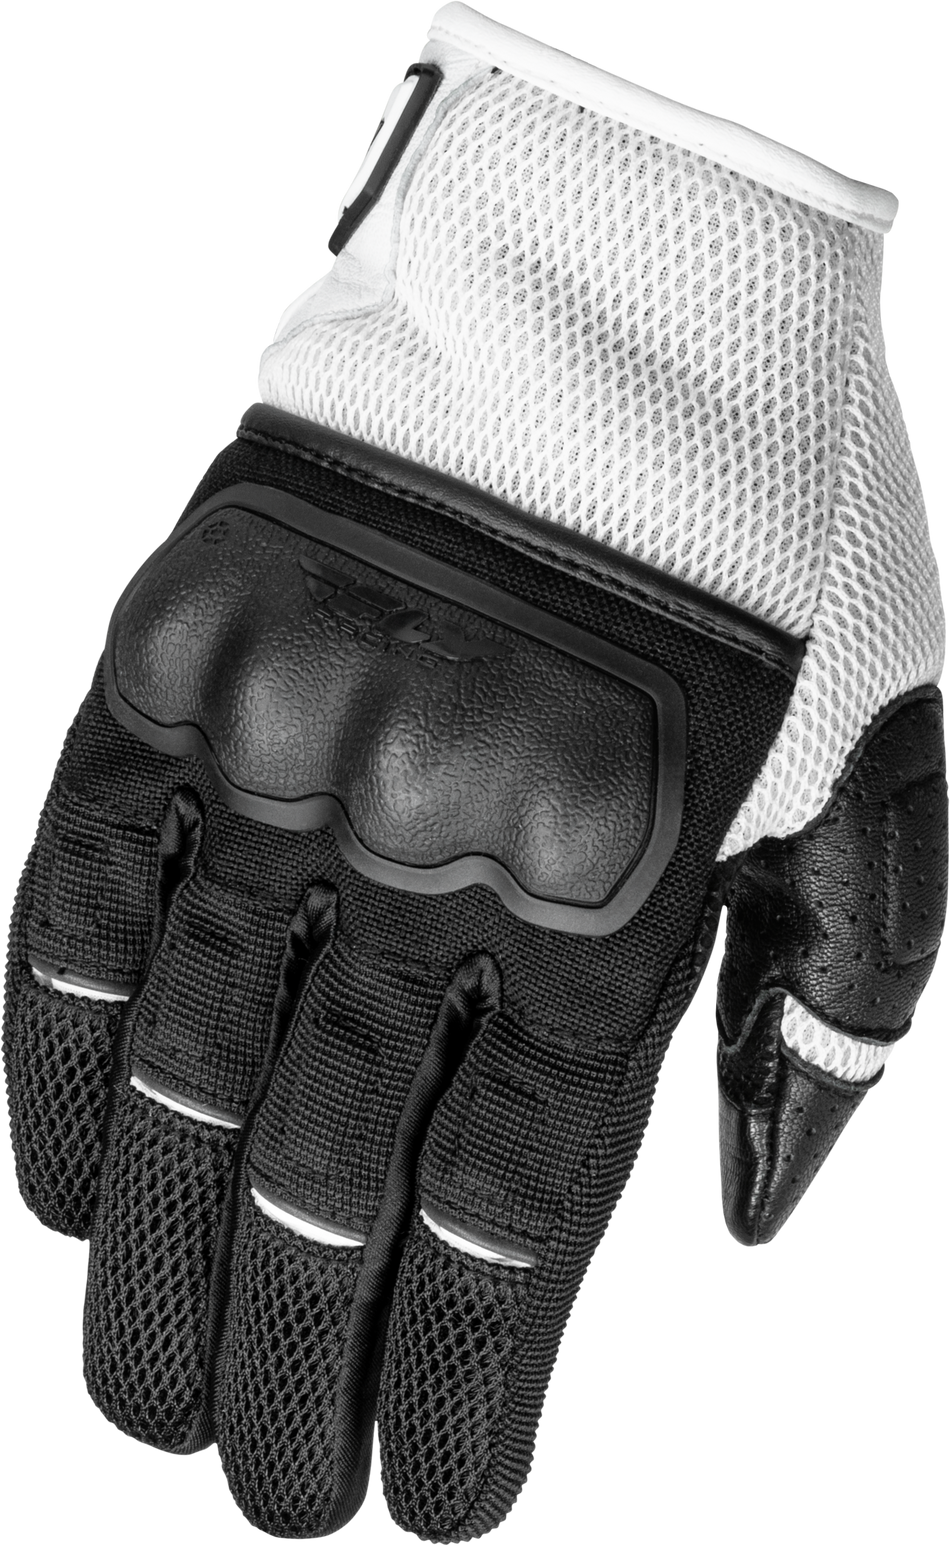 FLY RACING Women's Coolpro Force Gloves Black/White Lg 476-6301L